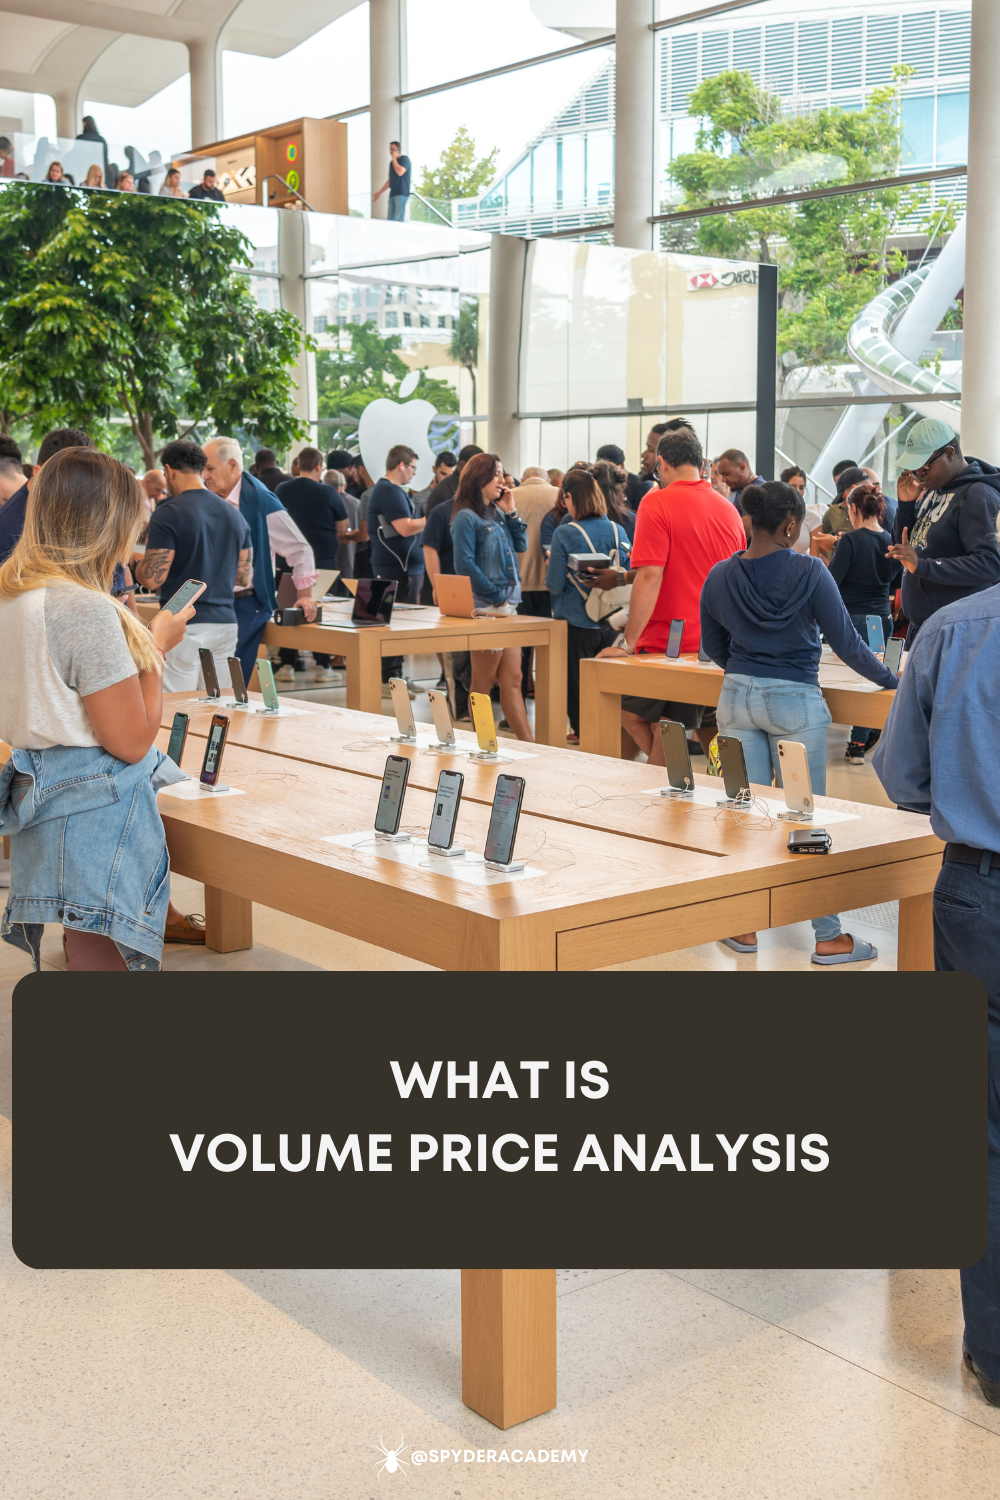 Volume Price Analysis (VPA) offers traders a powerful tool to decipher the market's language and make more informed trading decisions.